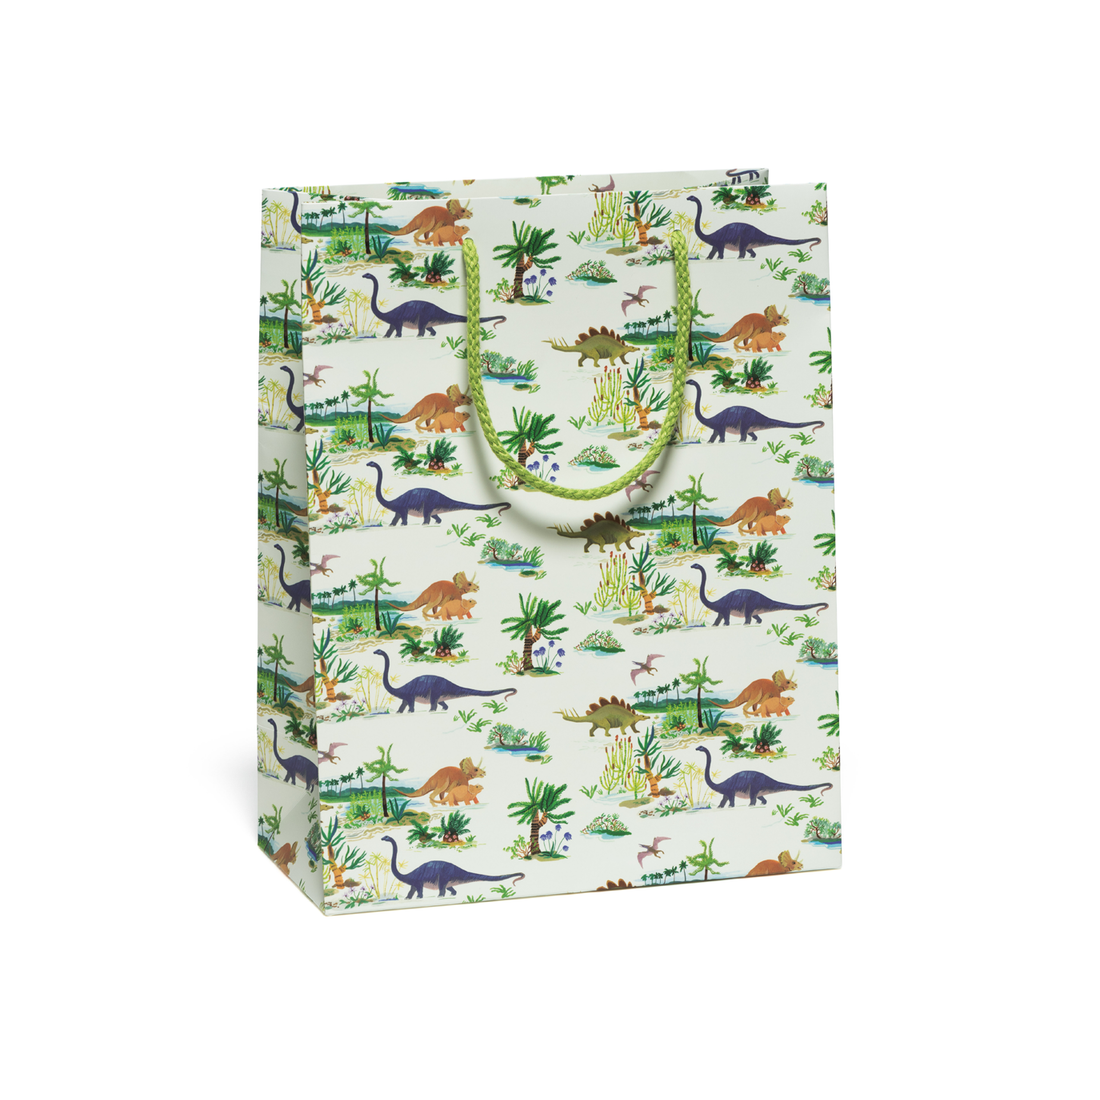 Image of gift bag with pale green background with images of dinosaurs in brown and grey with green cord handle. 